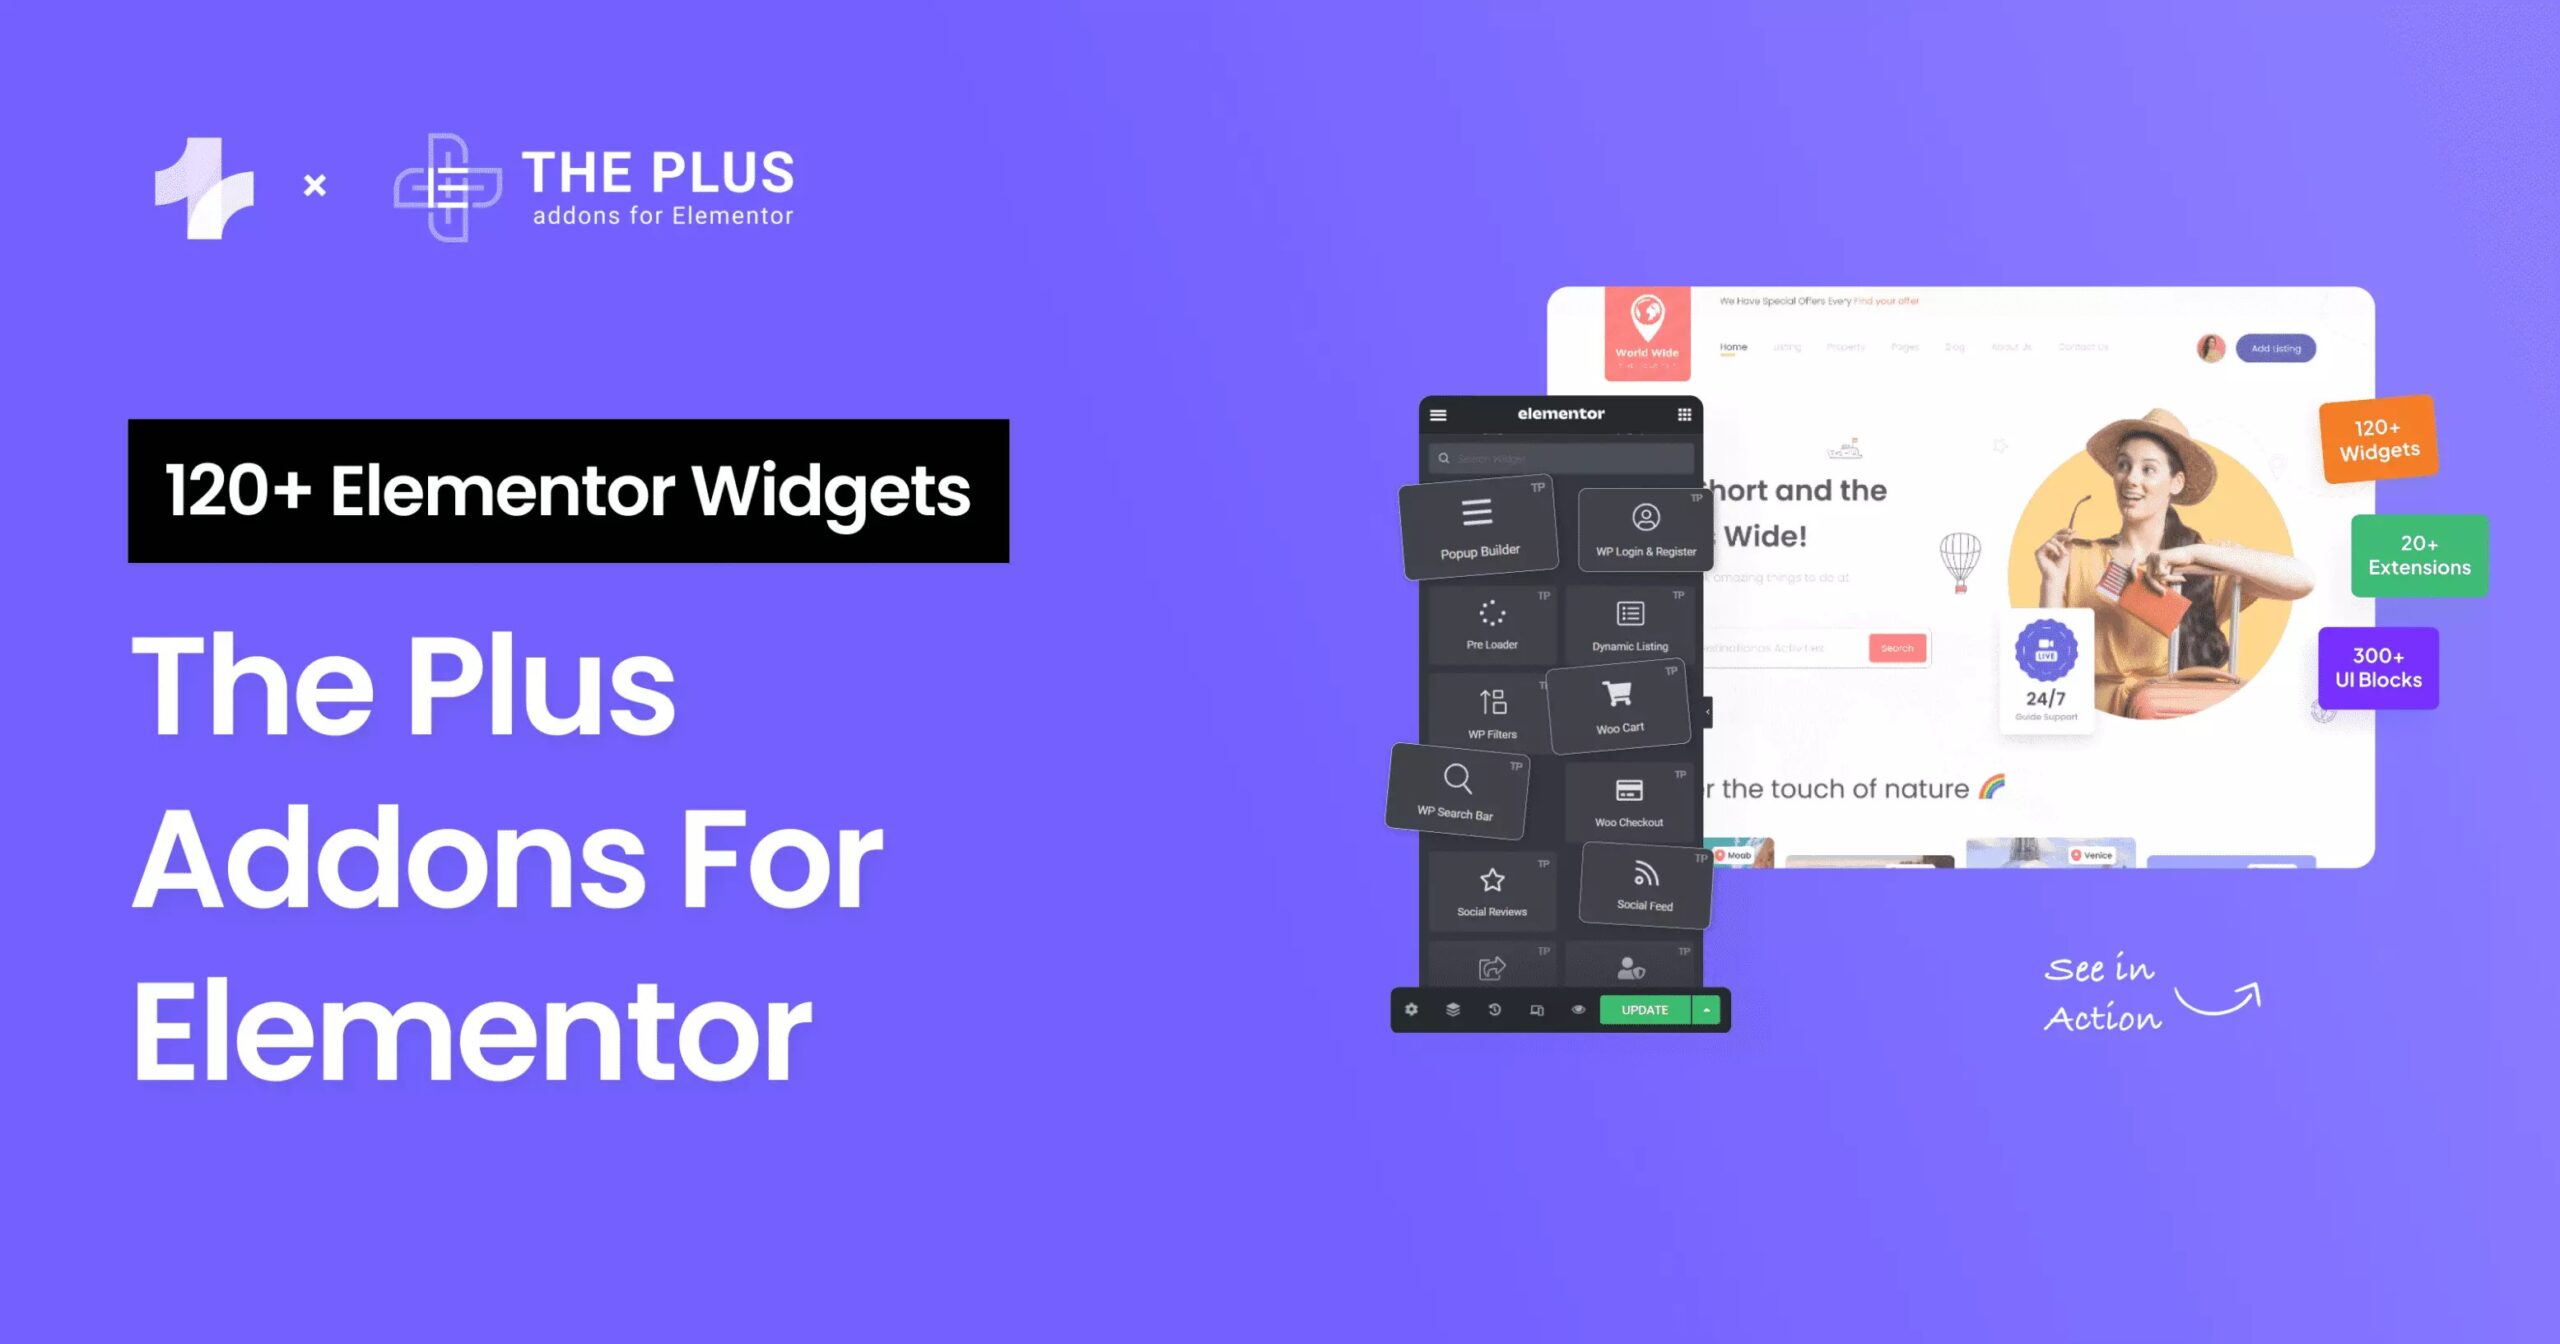 ThePlus Addon for Elementor - The Plus - Addon for Elementor Page Builder WP Plugin v5.4.1 by Codecanyon Nulled Free Download